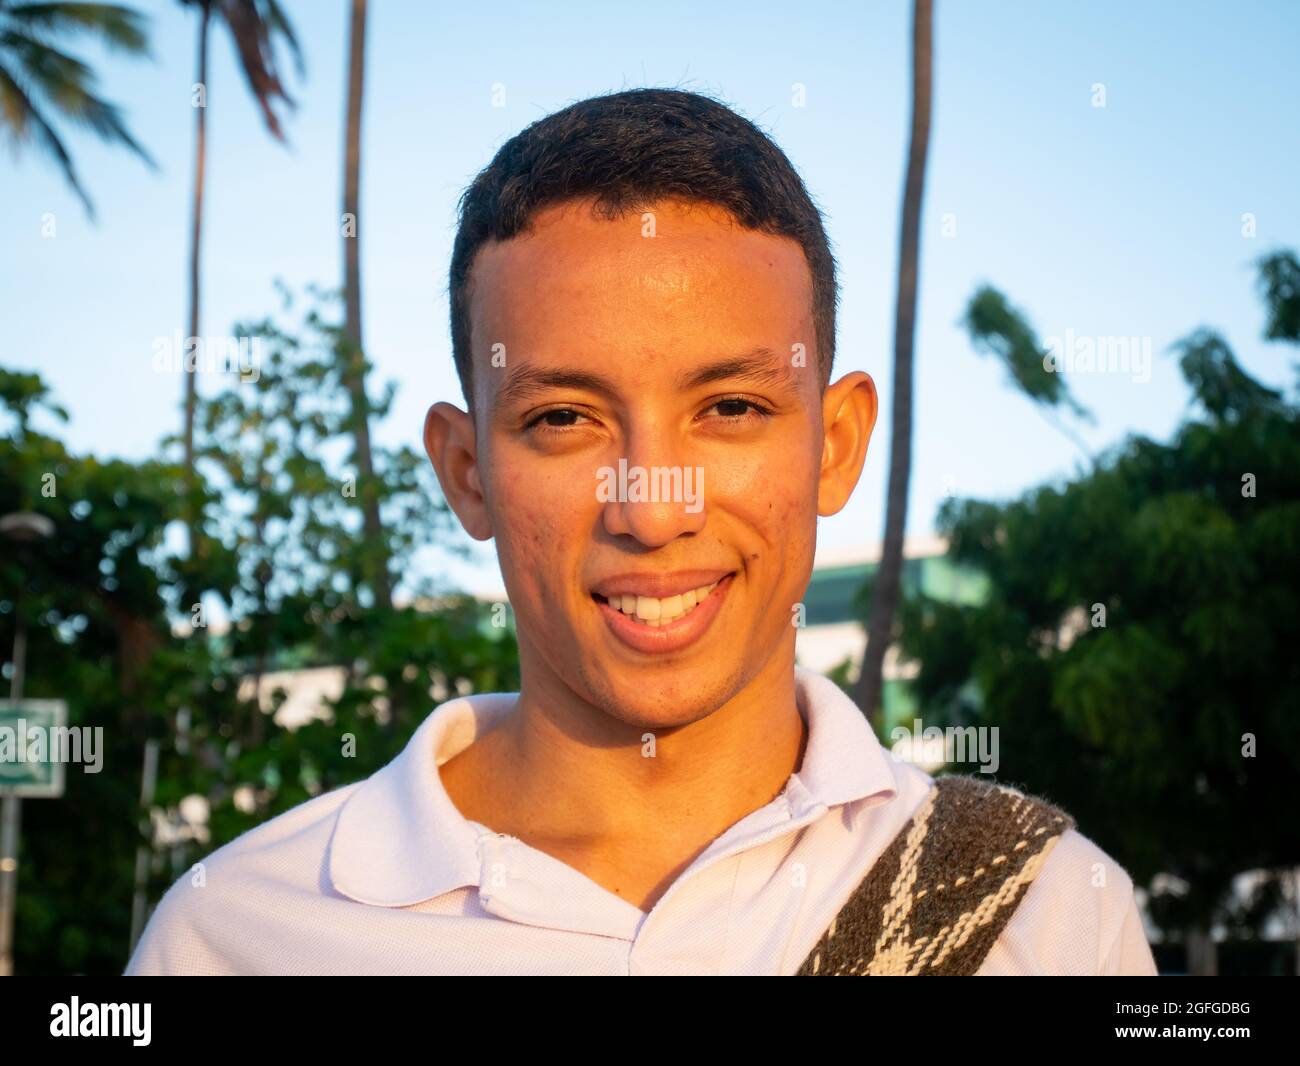 Riohacha, La Guajira, Colombia - May 26 2021: Portrait of a Young Latin Man Looking at the Camera in the Sunset with Blue Sky Stock Photo